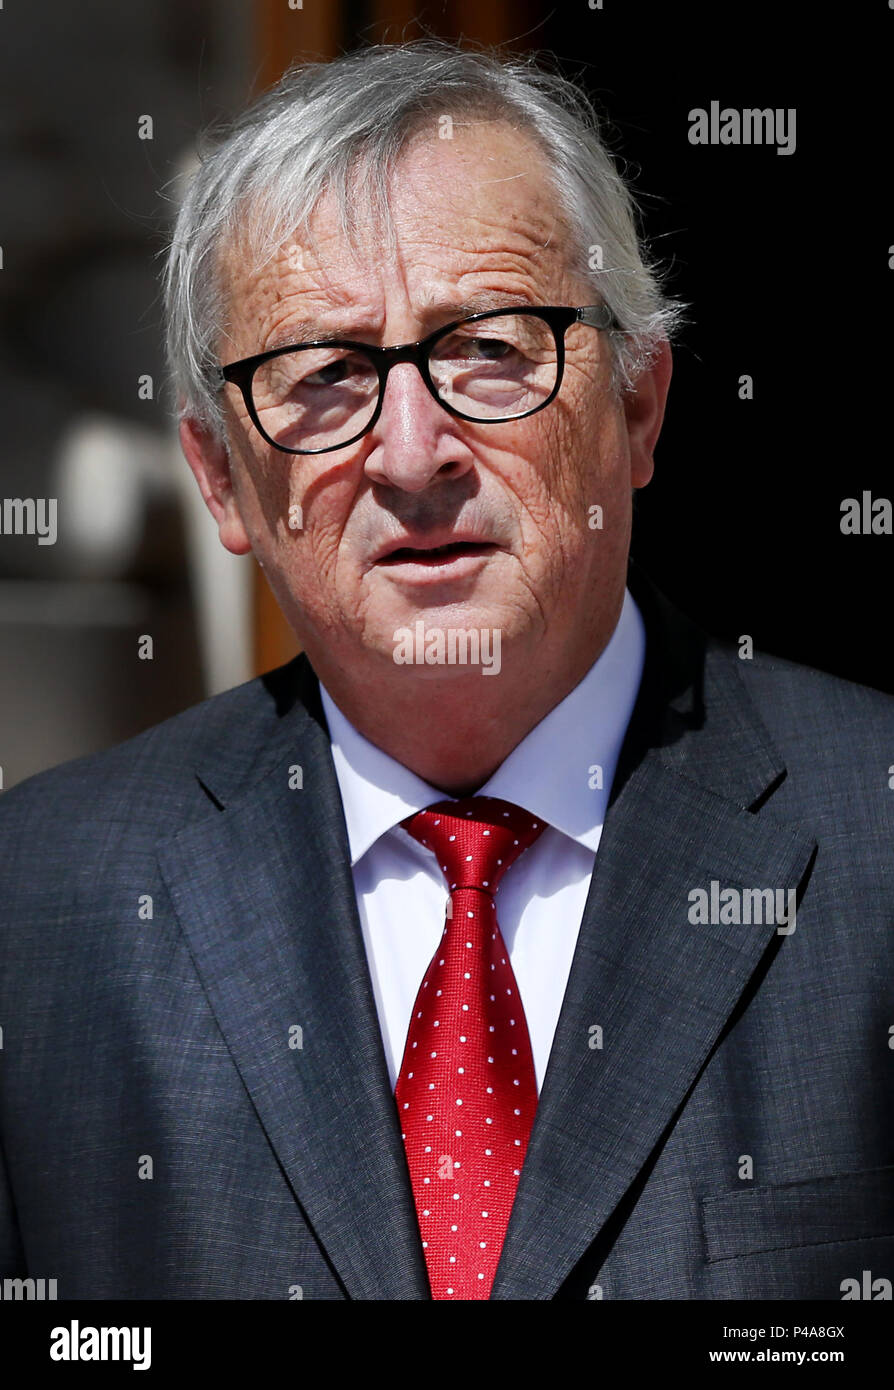 'Ireland Comes First'. Statement by Jean Claude Junker, President of the European Commission, when referring to the Brexit negotiations with the UK, during a visit to Dublin, Ireland Stock Photo